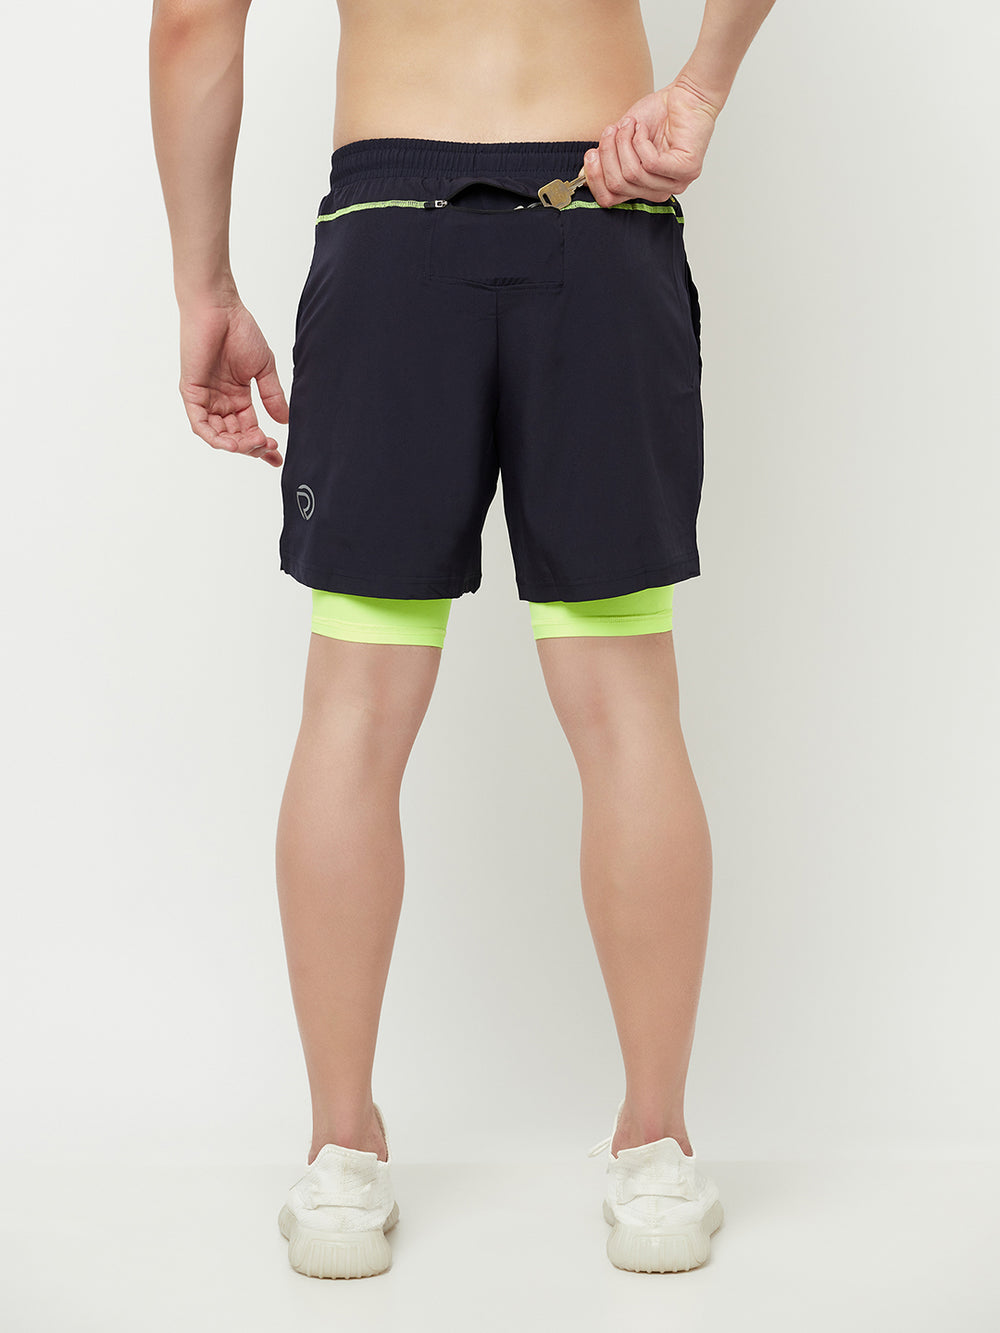 How are running shorts measured- All you need to know – TRUEREVO